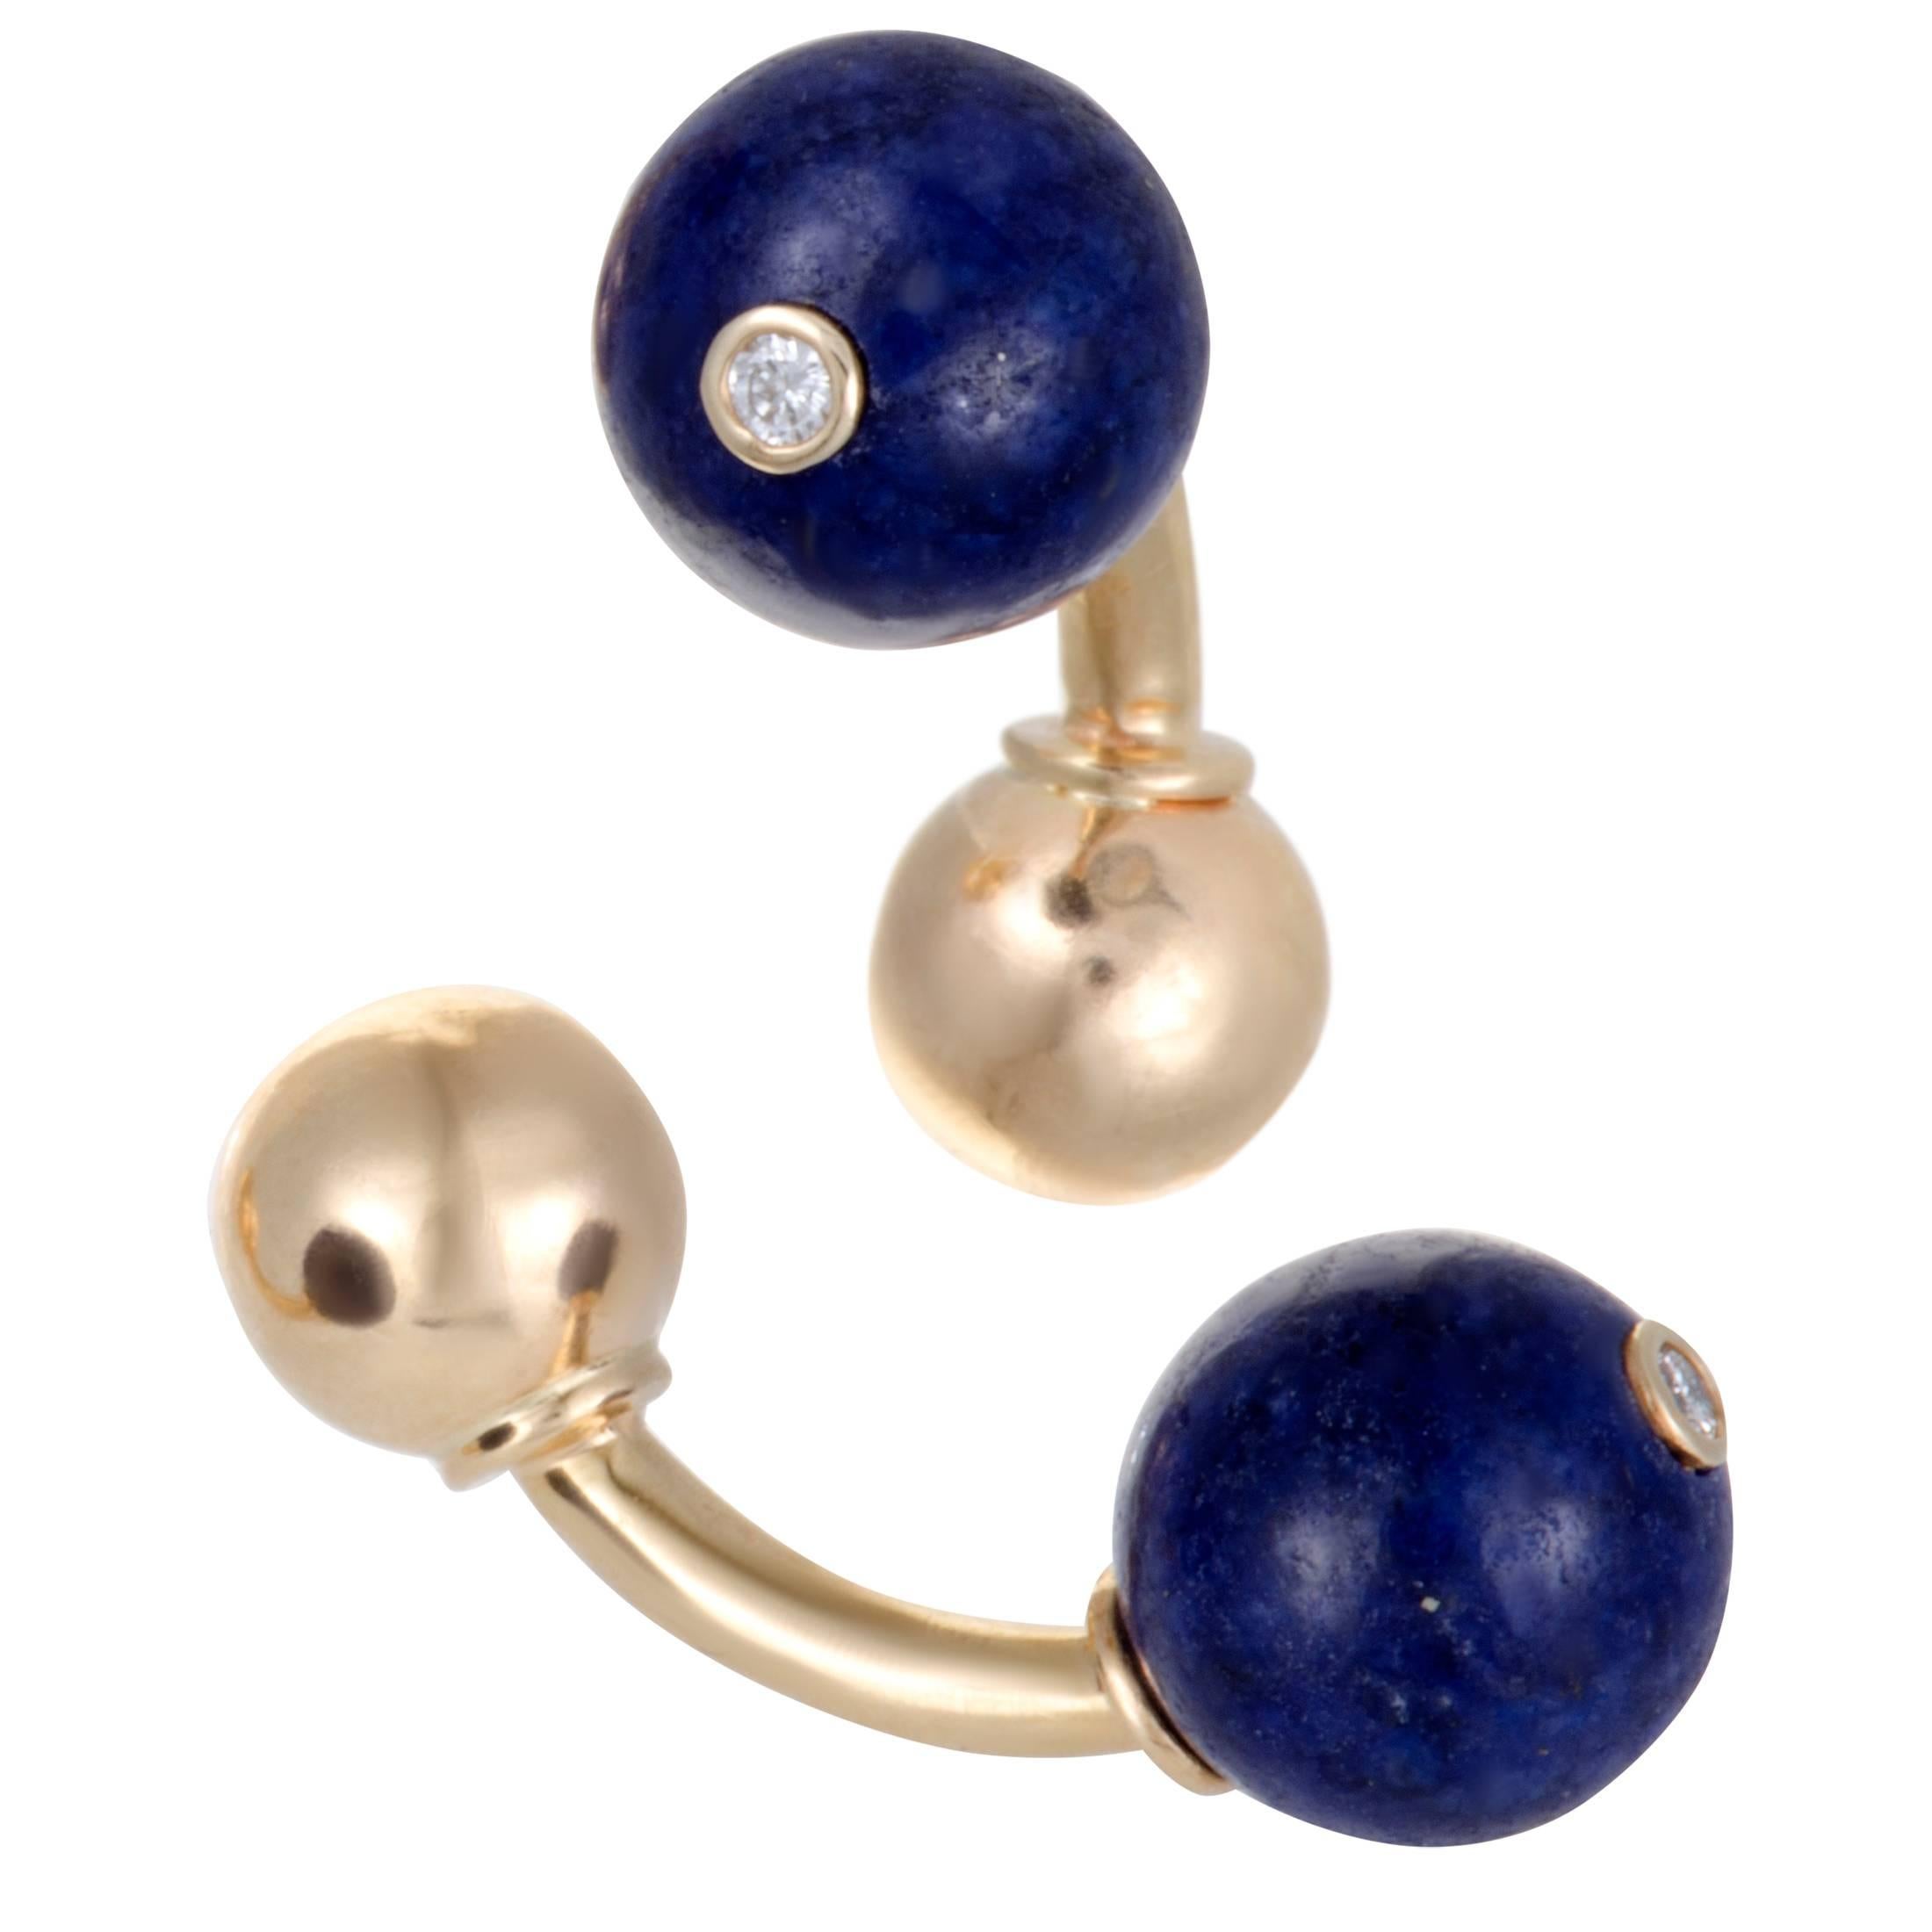 Elegantly designed by Tiffany & Co. in shimmering 18K yellow gold, this stunning pair of cufflinks ring is exemplary in design and style. The classy pair's design includes 0.06ct of sparkling diamonds and a captivating blue lapis lazuli stones that